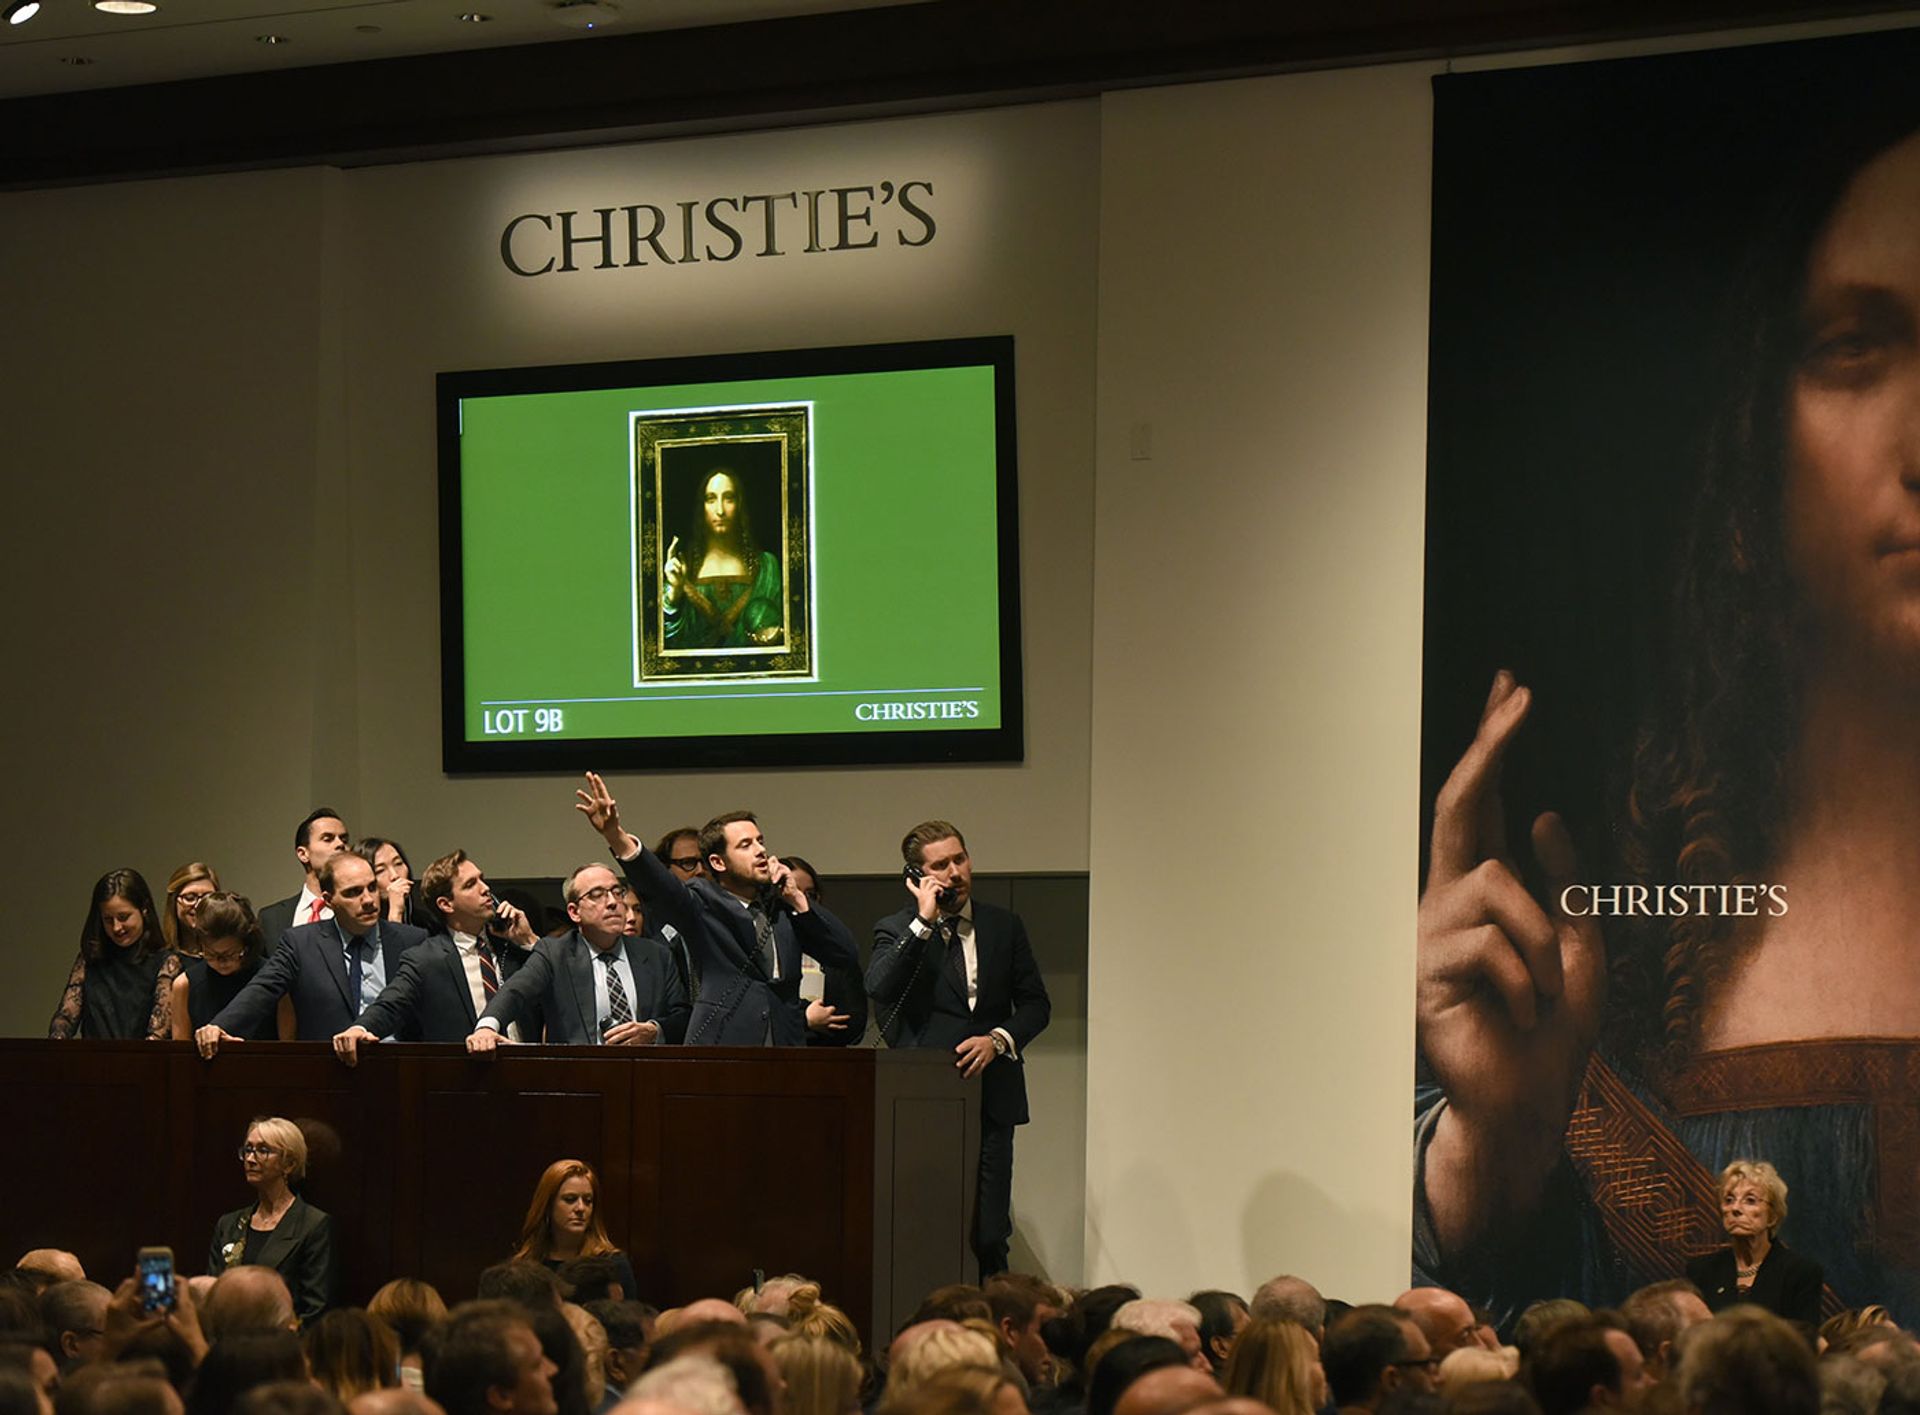 The 18-minute sale of the $450.3m Salvator Mundi in progress at Christie's, New York, on 15 November 2017 Timothy A. Clary/AFP via Getty Images